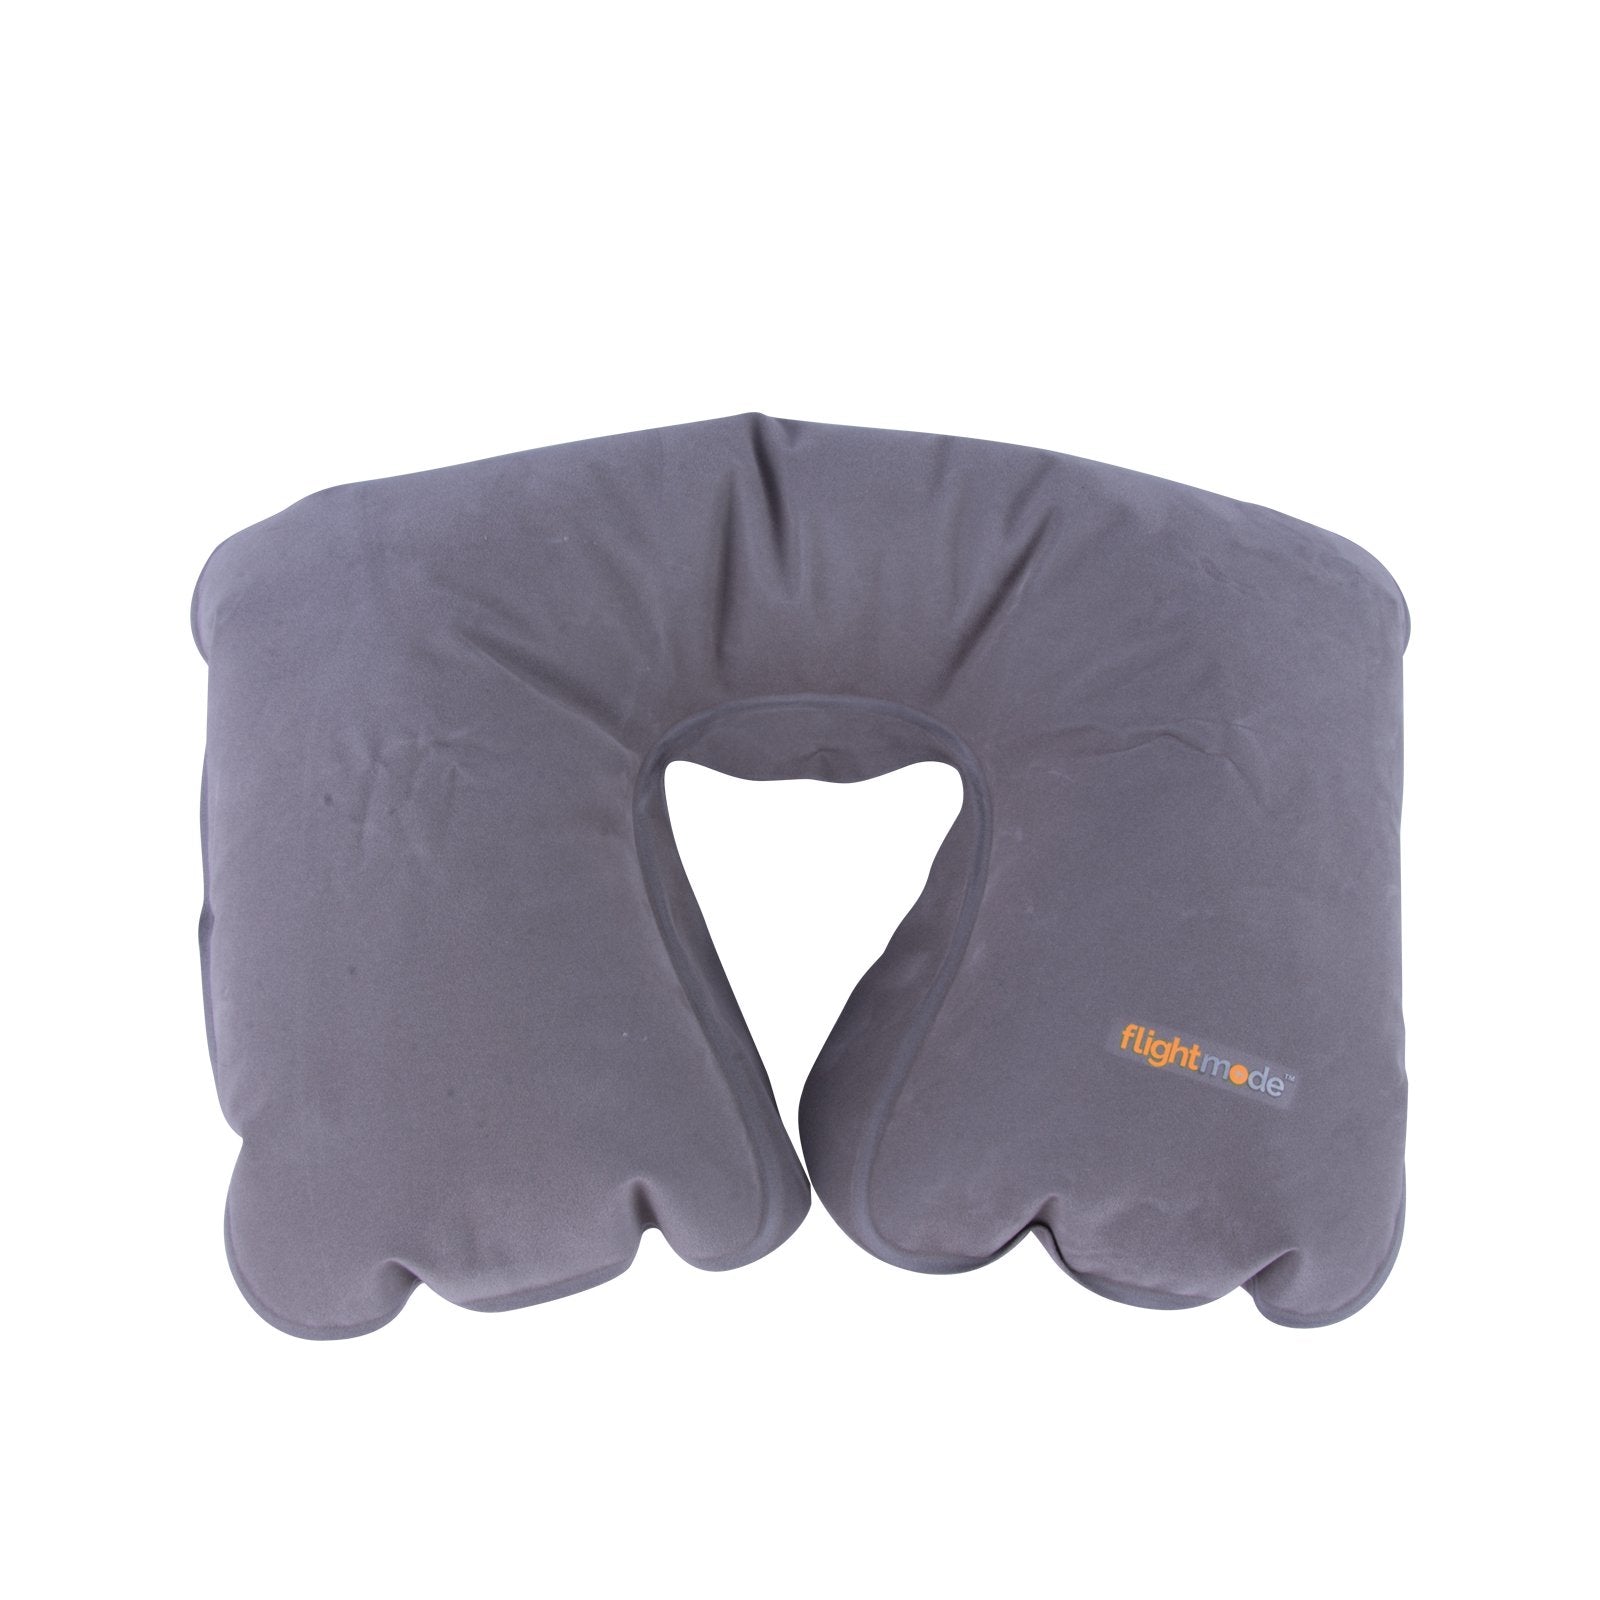 Flightmode Bags and Luggage Lightweight Inflatable Travel Neck Pillow - Grey